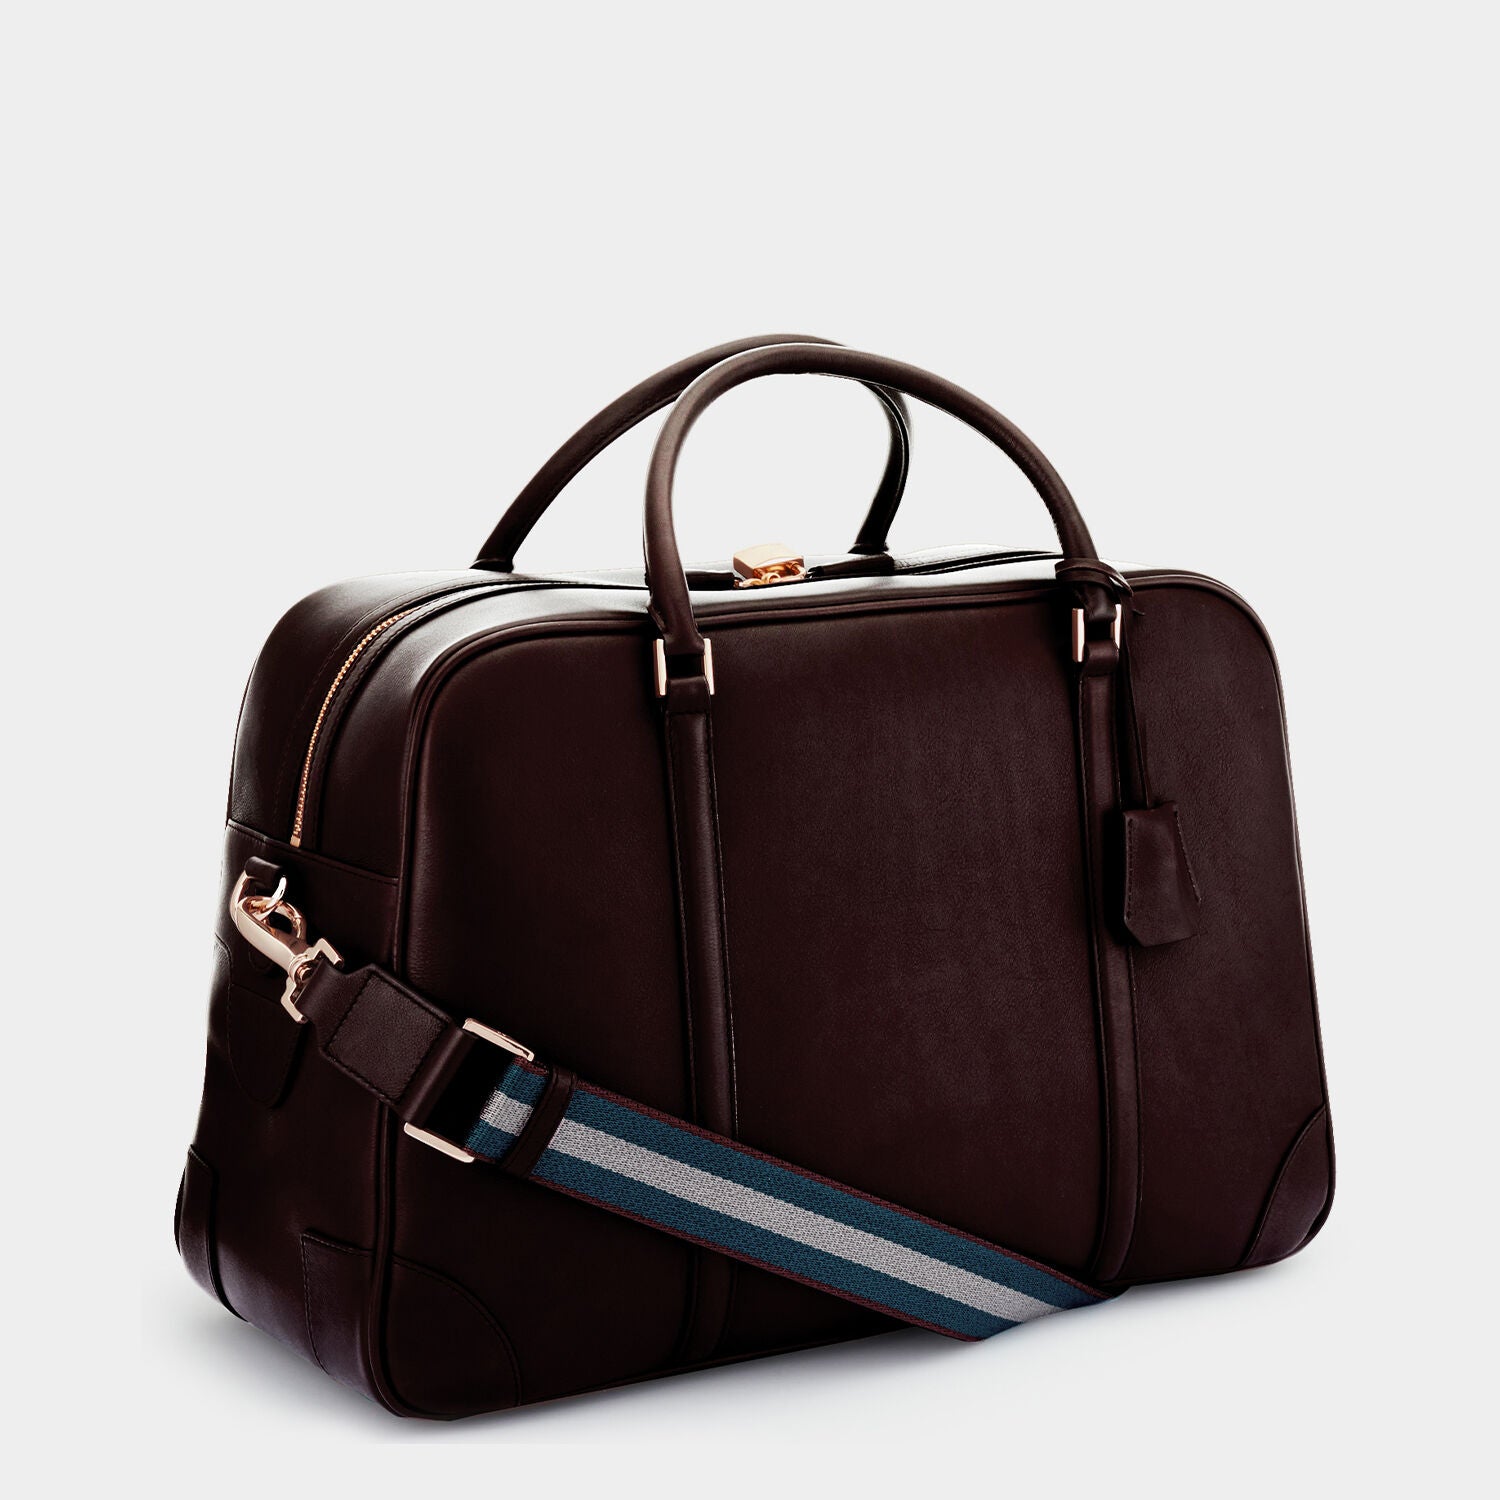 Bespoke Latimer Travel Bag -

                  
                    Butter Leather in Chocolate -
                  

                  Anya Hindmarch UK
